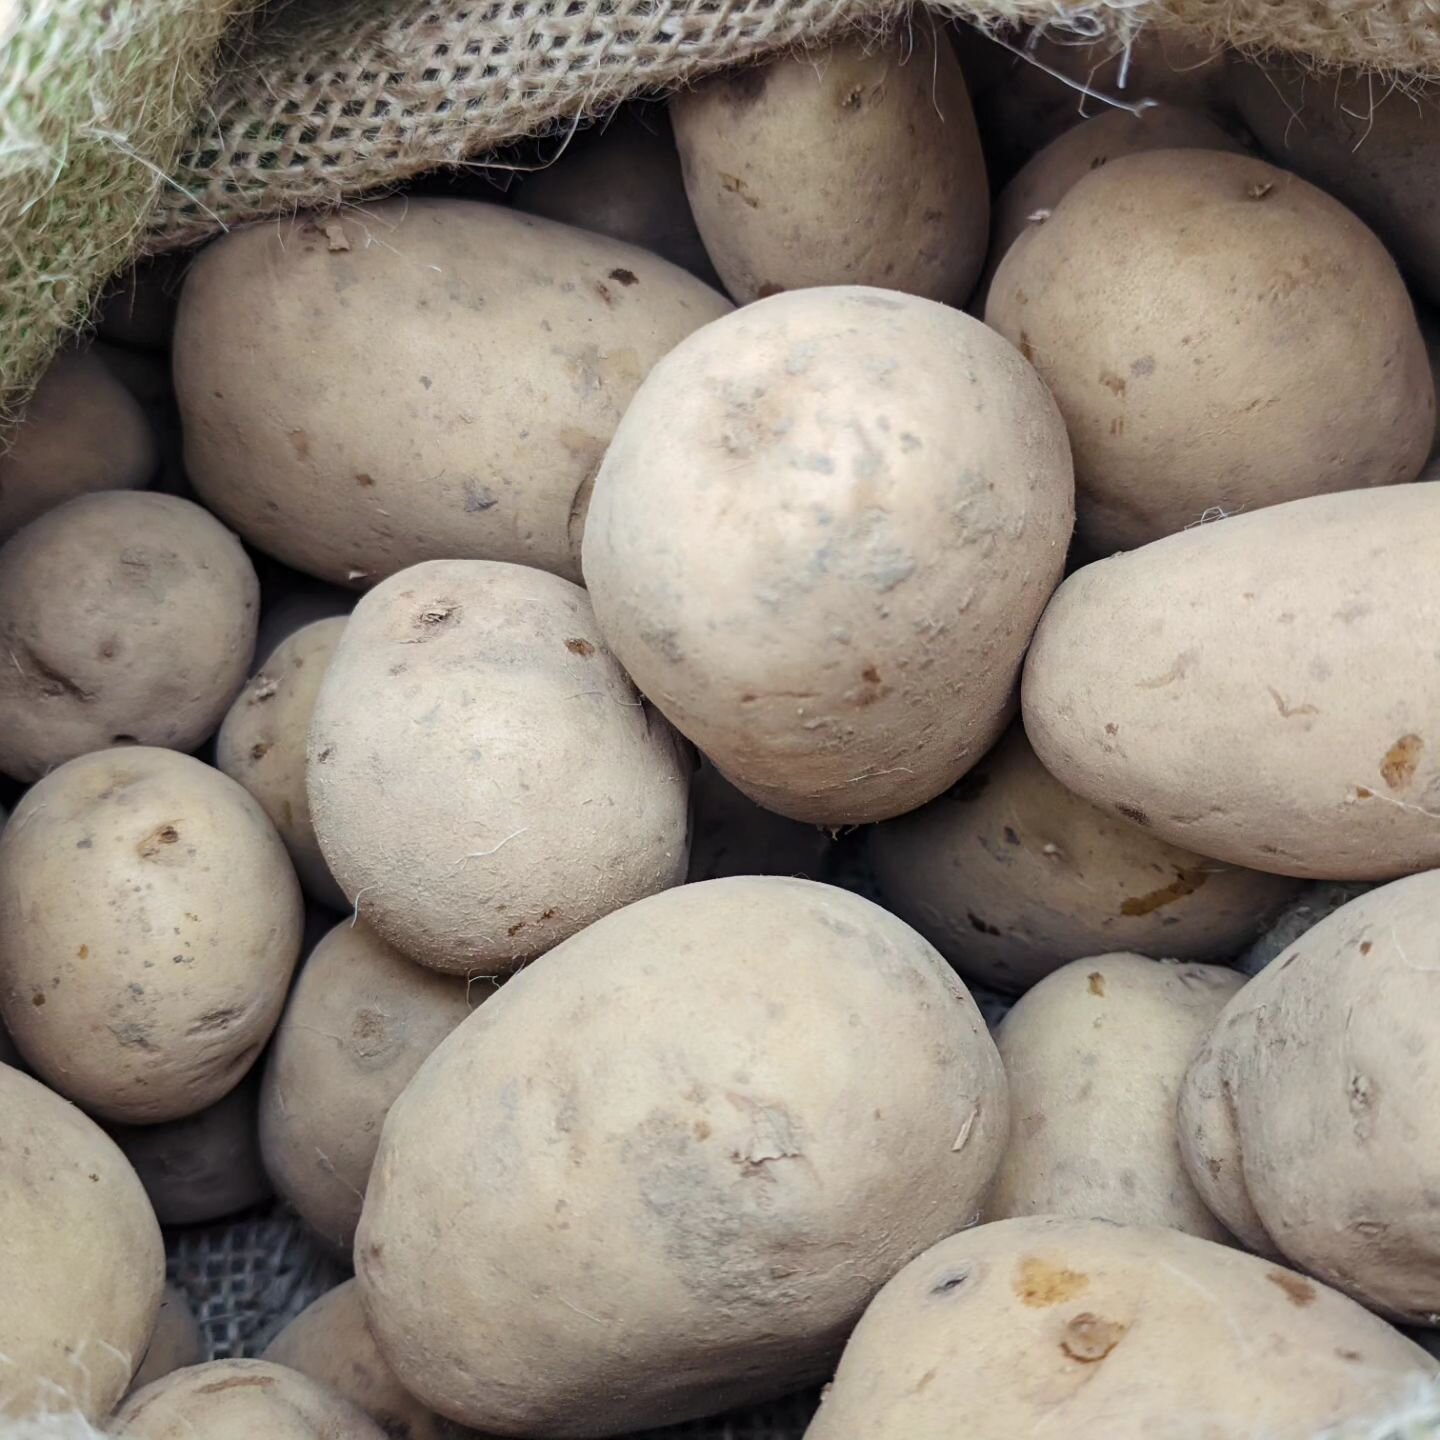 Seed potatoes!! 😁 🥔 Come pick some up at our EGP seed swap tomorrow from 10.30 to 12.30 at the Out of the Blue drill hall on Dalmeny Street. 4 varieties available: Maris peer, Bambino, Golden Wonder and Kingsman. Lots of other seeds will also be av